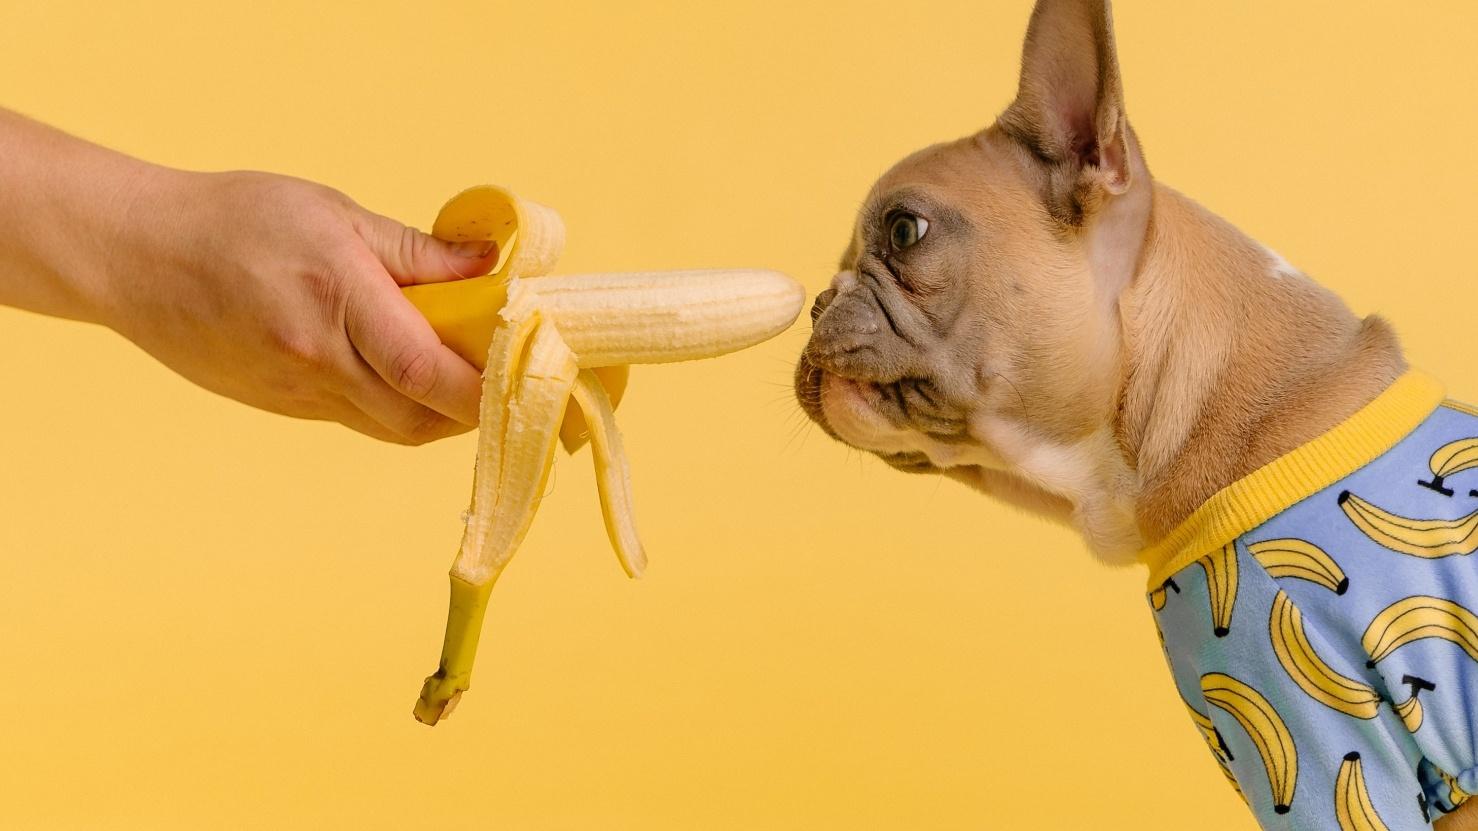 An extended hand holding out a peeled banana to a cute little pug puppy who isn't interested in it. Also the puppy is wearing baby blue PJs with a banana print.